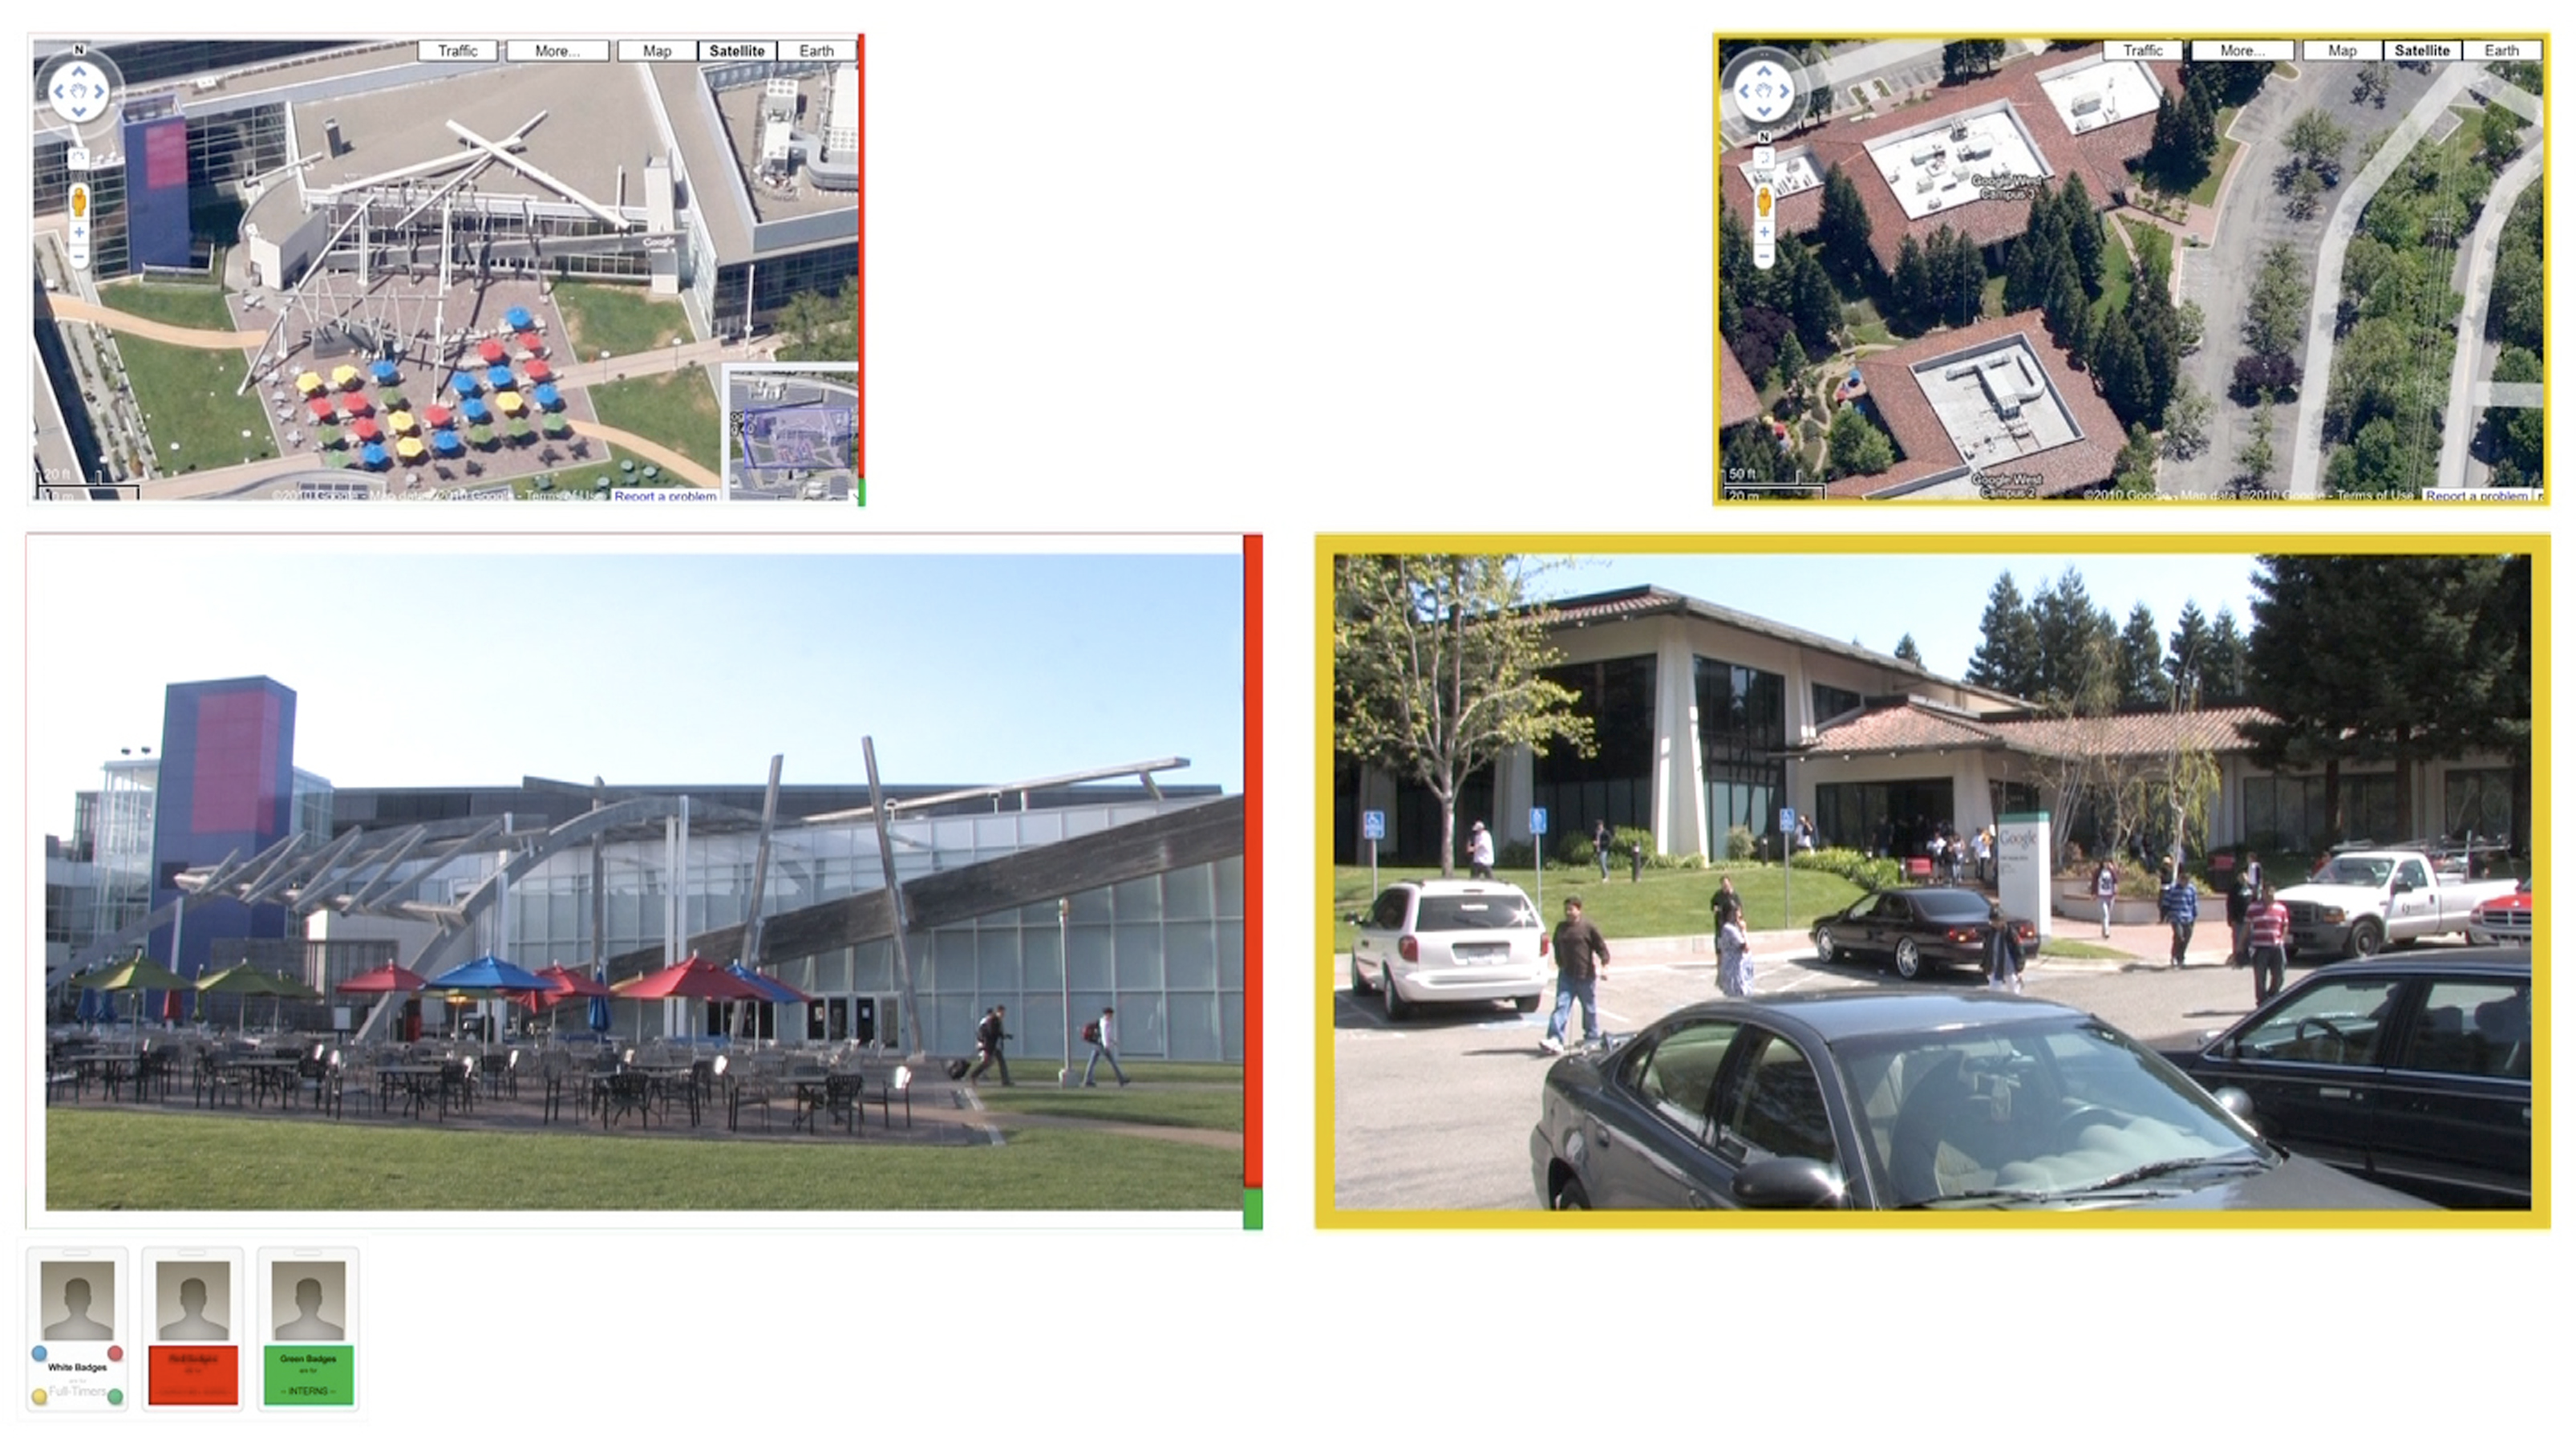 Four images from left to right: upper corner depicts a bird's eye view of a large complex with multi-colored umbrellas in a parking lot; right corner depicts roof of complex reaching into a landscape, bottom left corner depicts a side of the complex with figures crossing the lawn, bottom left depicts figures nearing their car